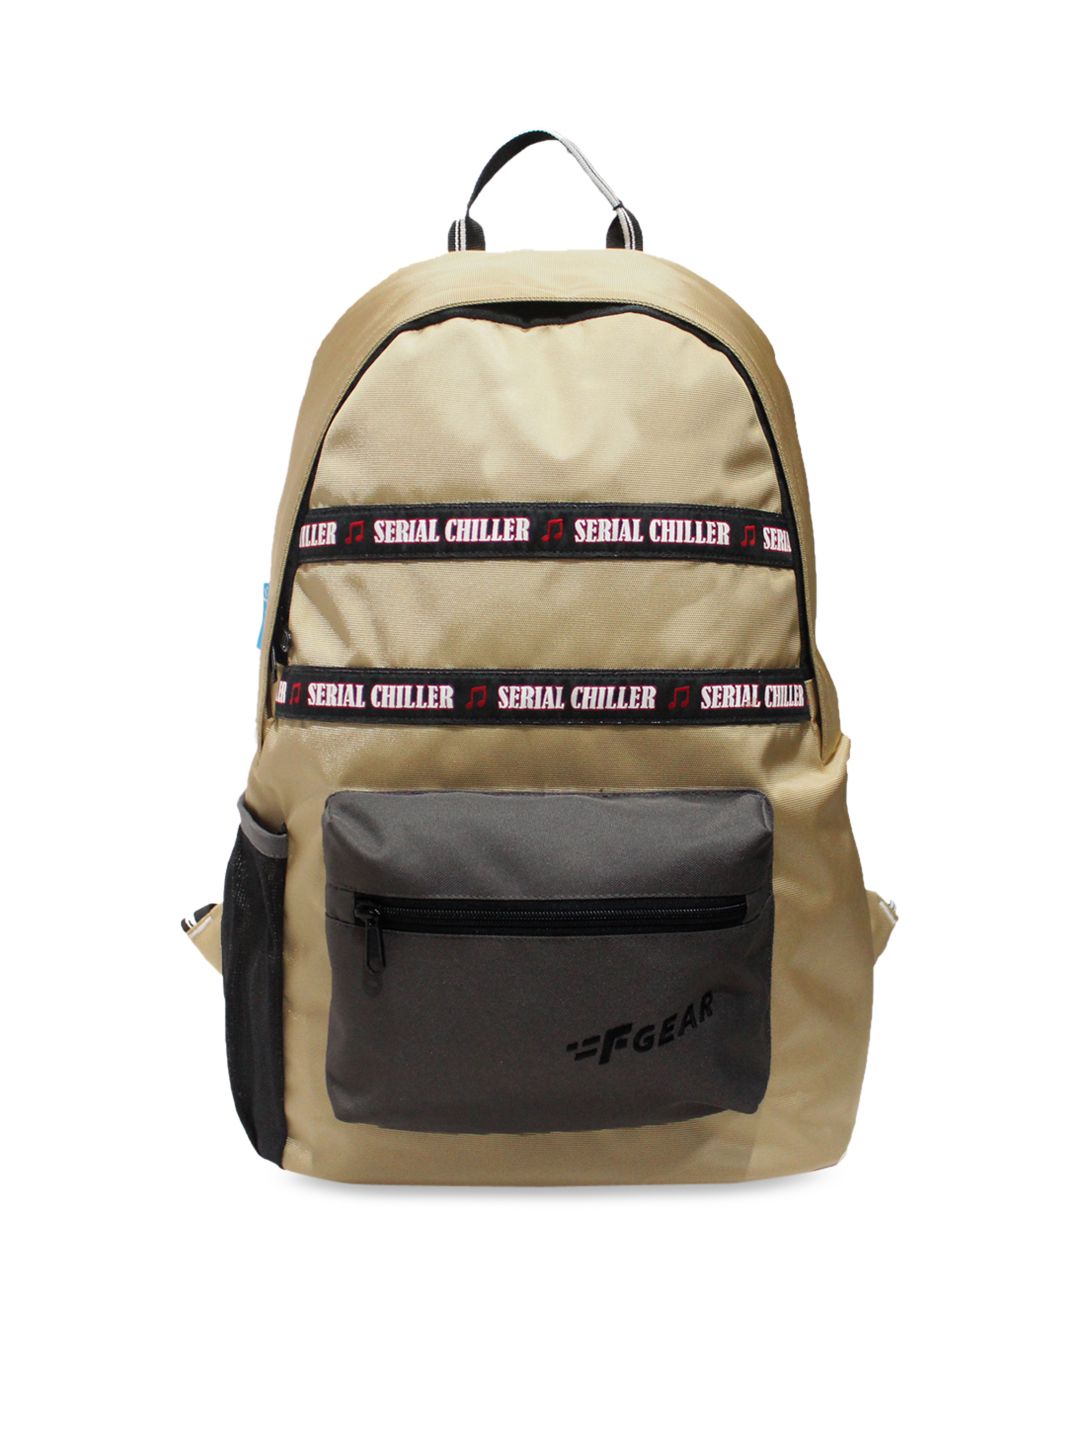 F Gear Unisex Beige & Charcoal Colourblocked Backpack Price in India